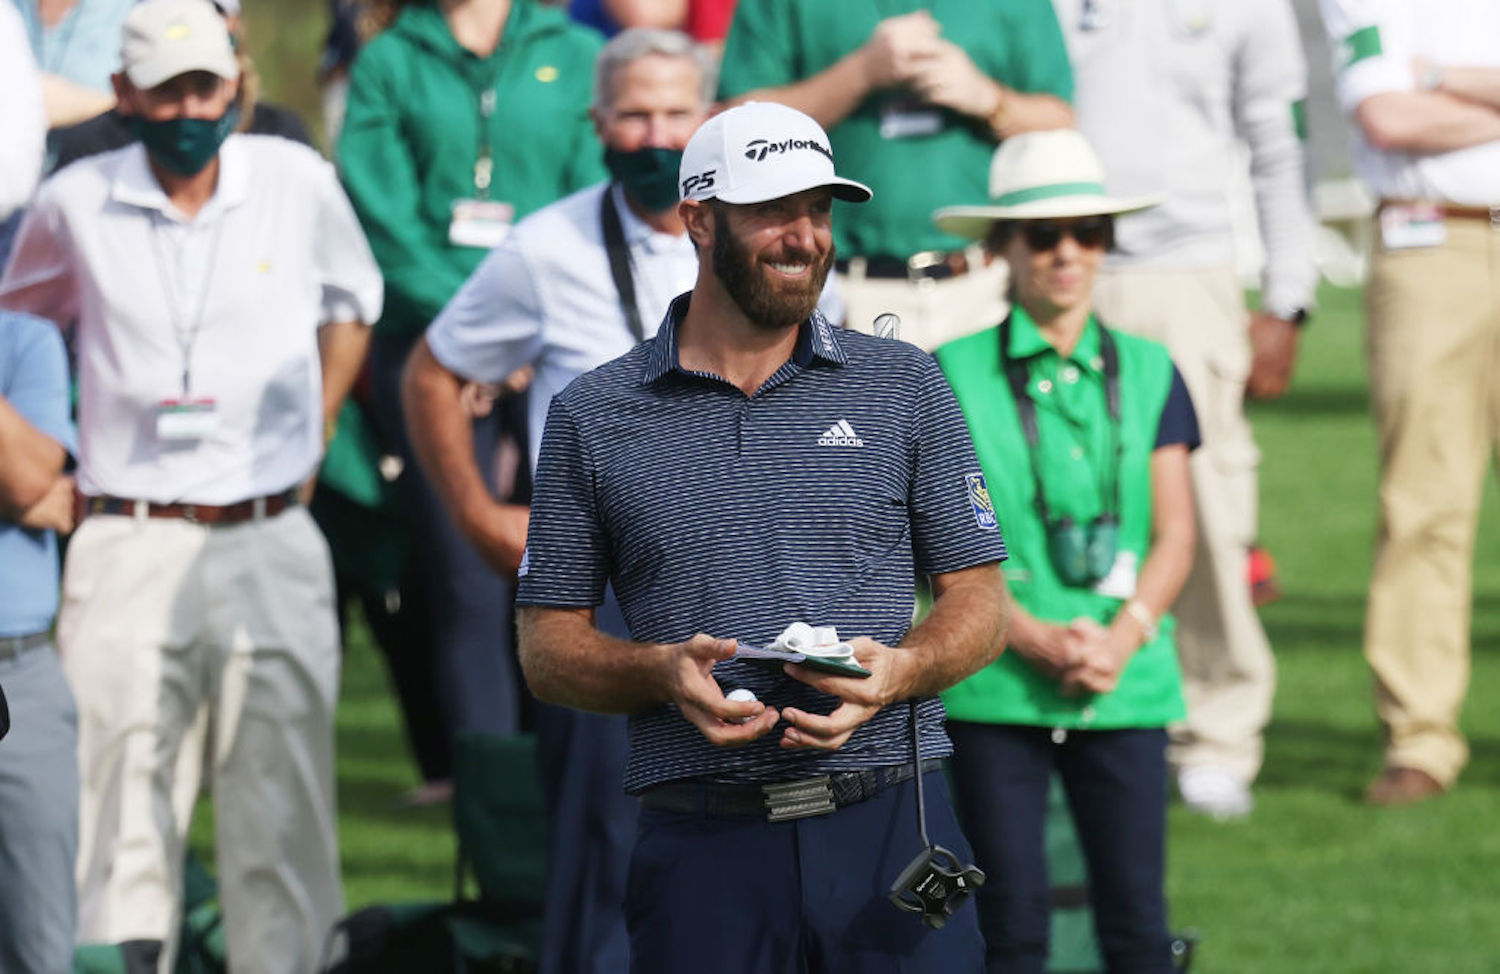 Dustin Johnson Just Made Masters History With His Dominant Win at Augusta